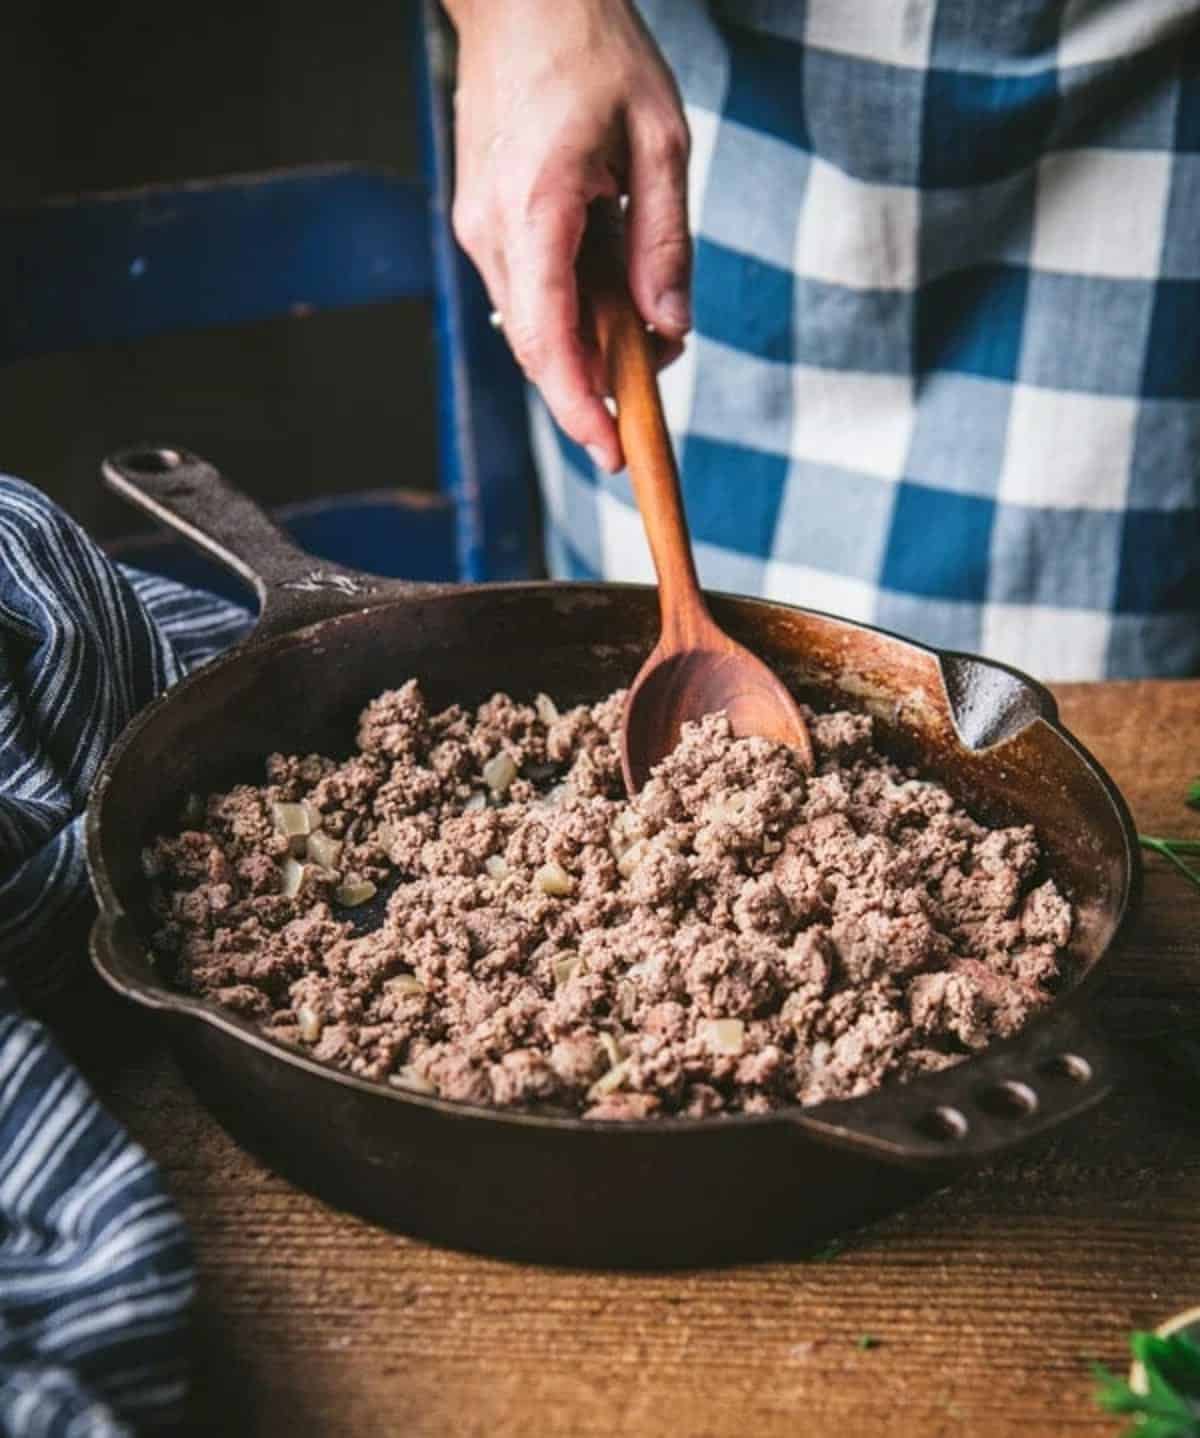 Browning ground beef in a cast iron skillet.